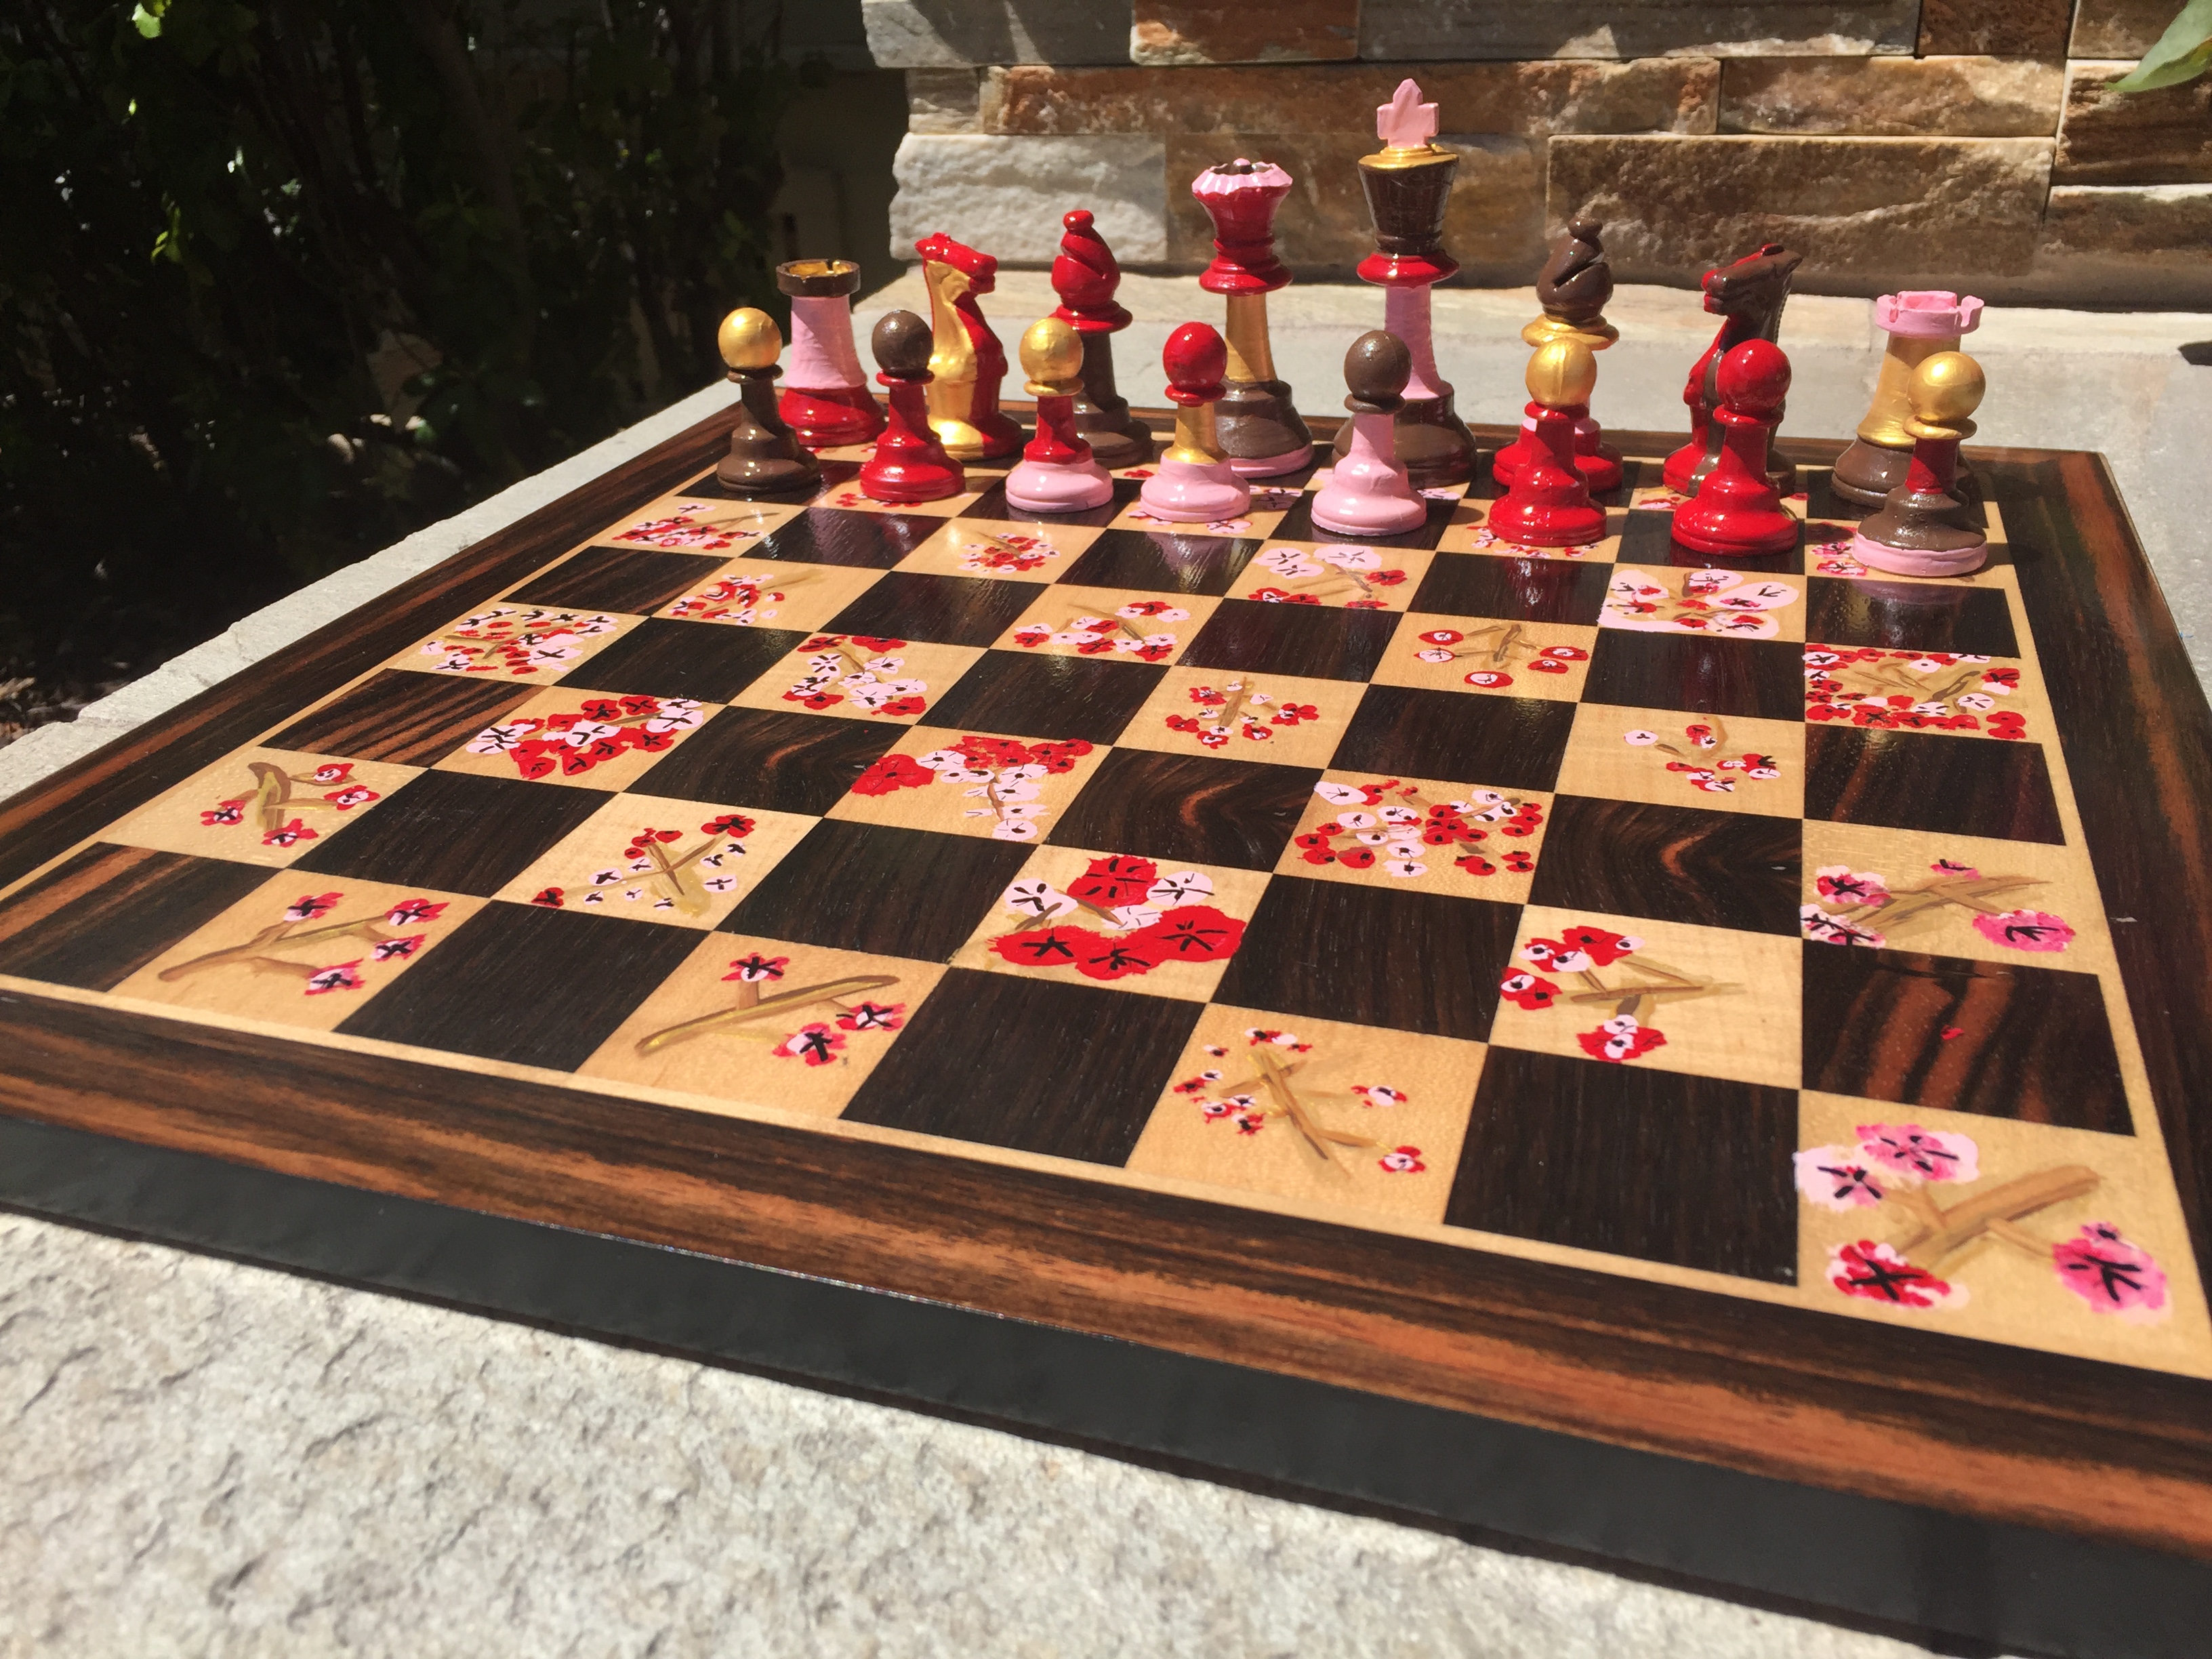 Kindergartners Paint Chess Sets like this flower one